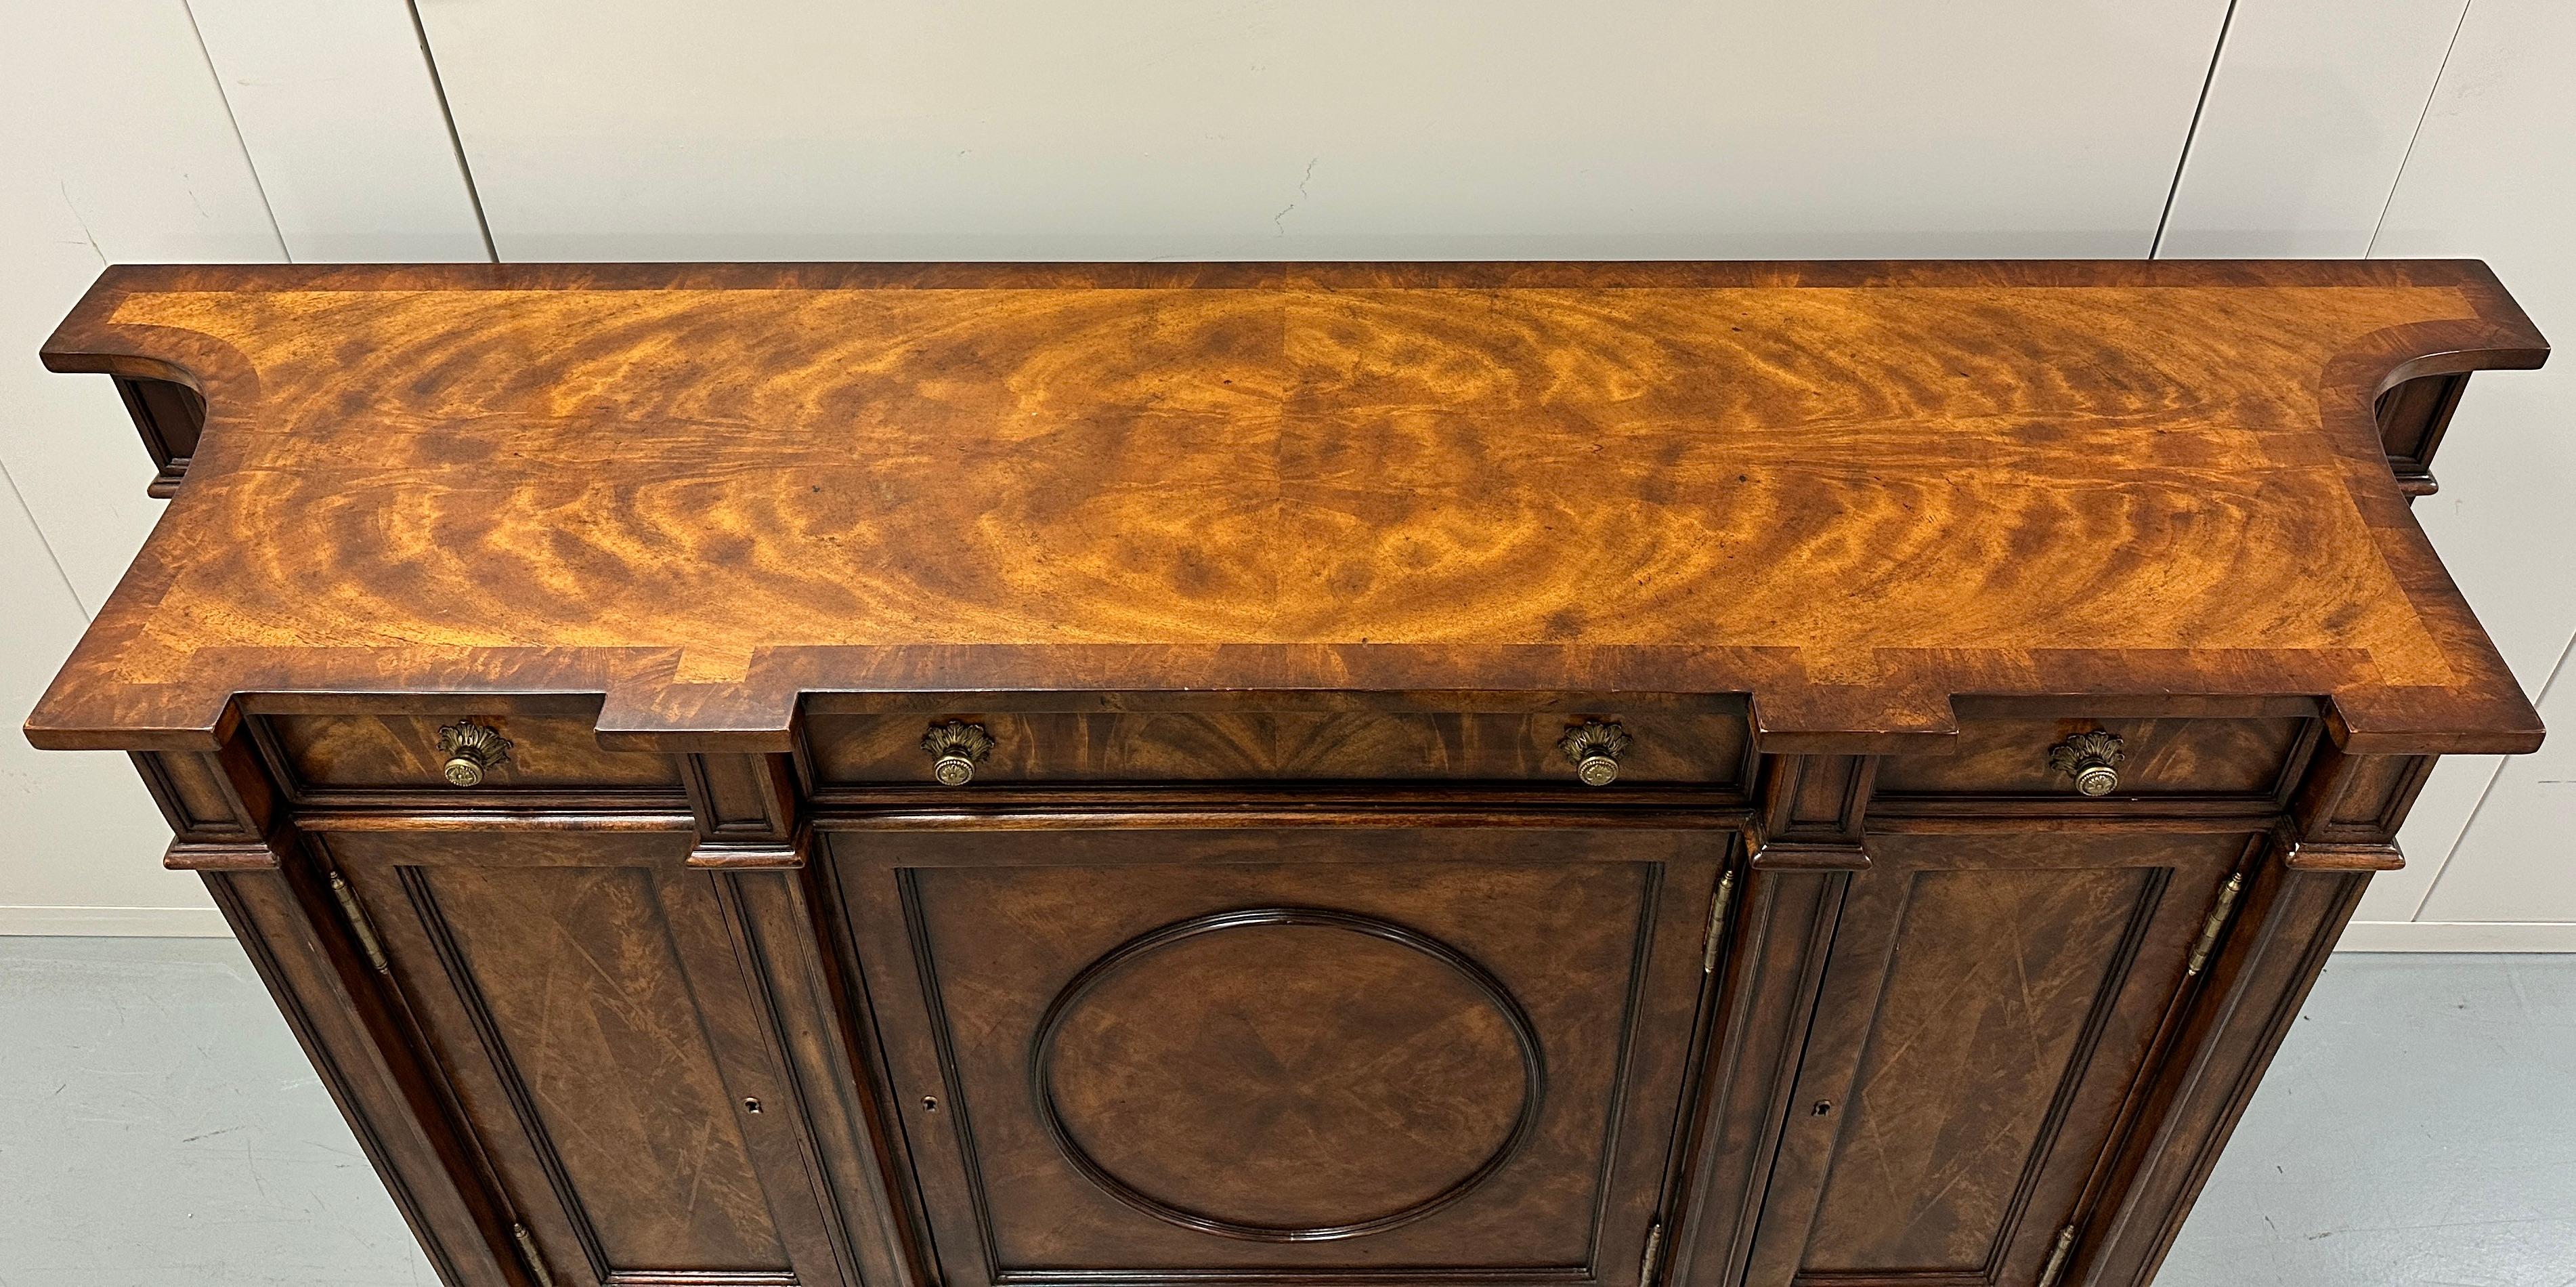 A fine mahogany, flame veneered and burl banded side cabinet, with three frieze drawers above corresponding oval panel and lozenge inlaid doors enclosing adjustable shelves, with concave sides, on turned legs with brass cappings. Replica collection.